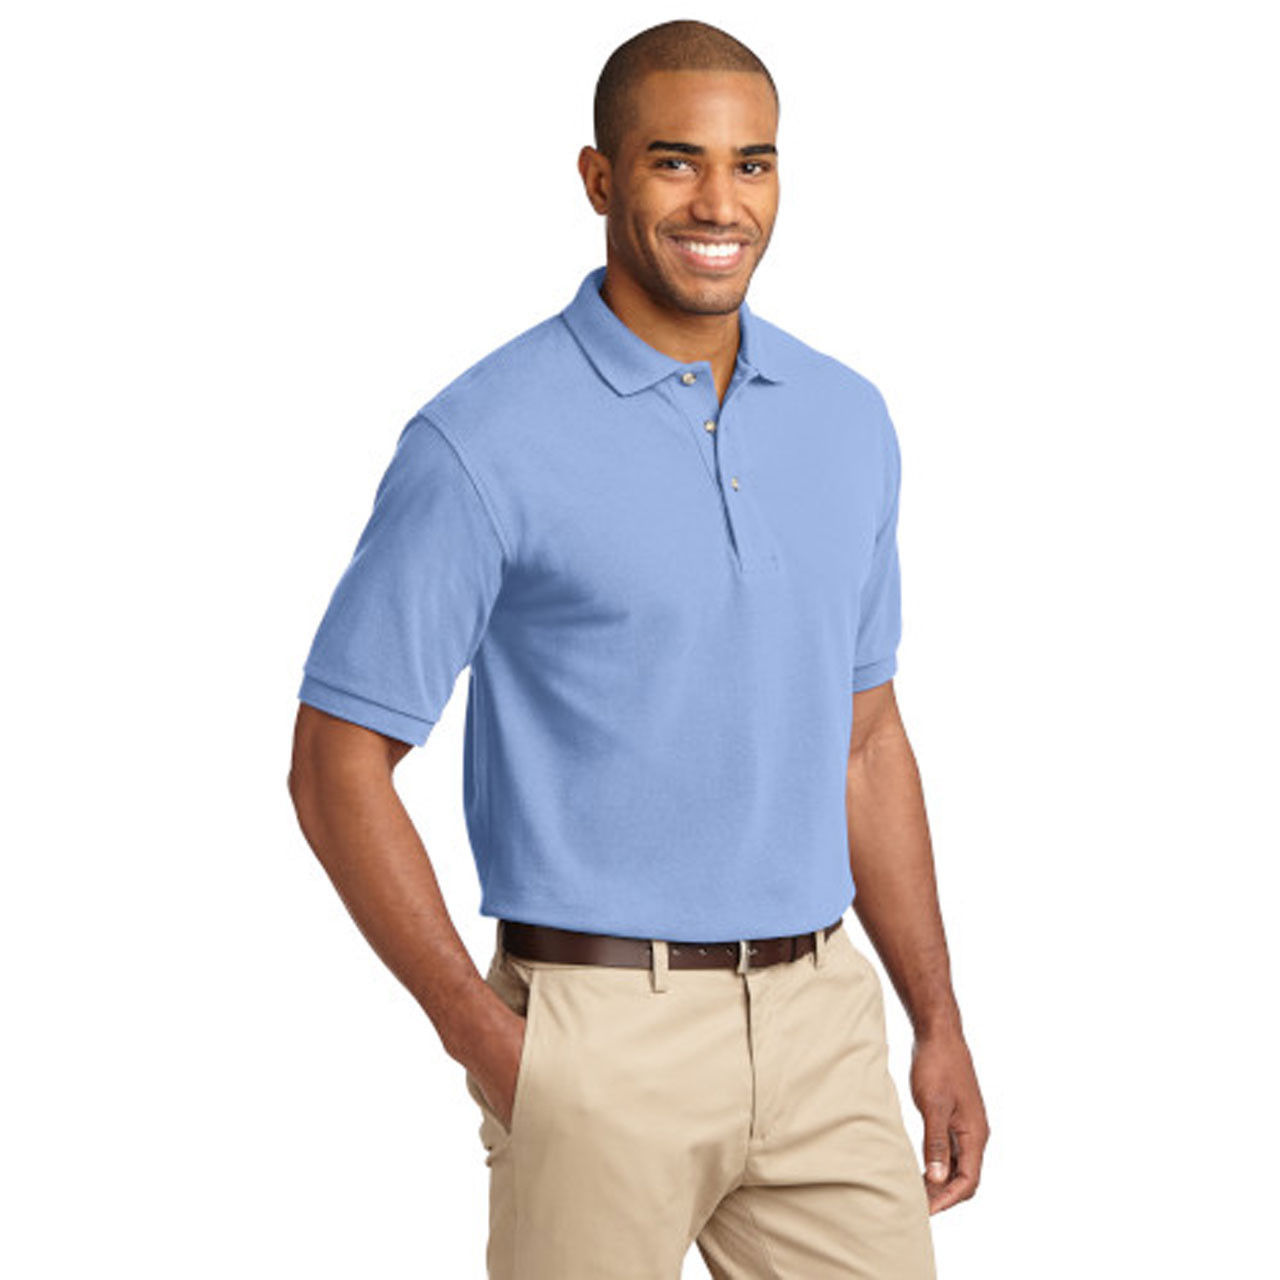 Does the men's blue polo with khaki pants have specific stitching?